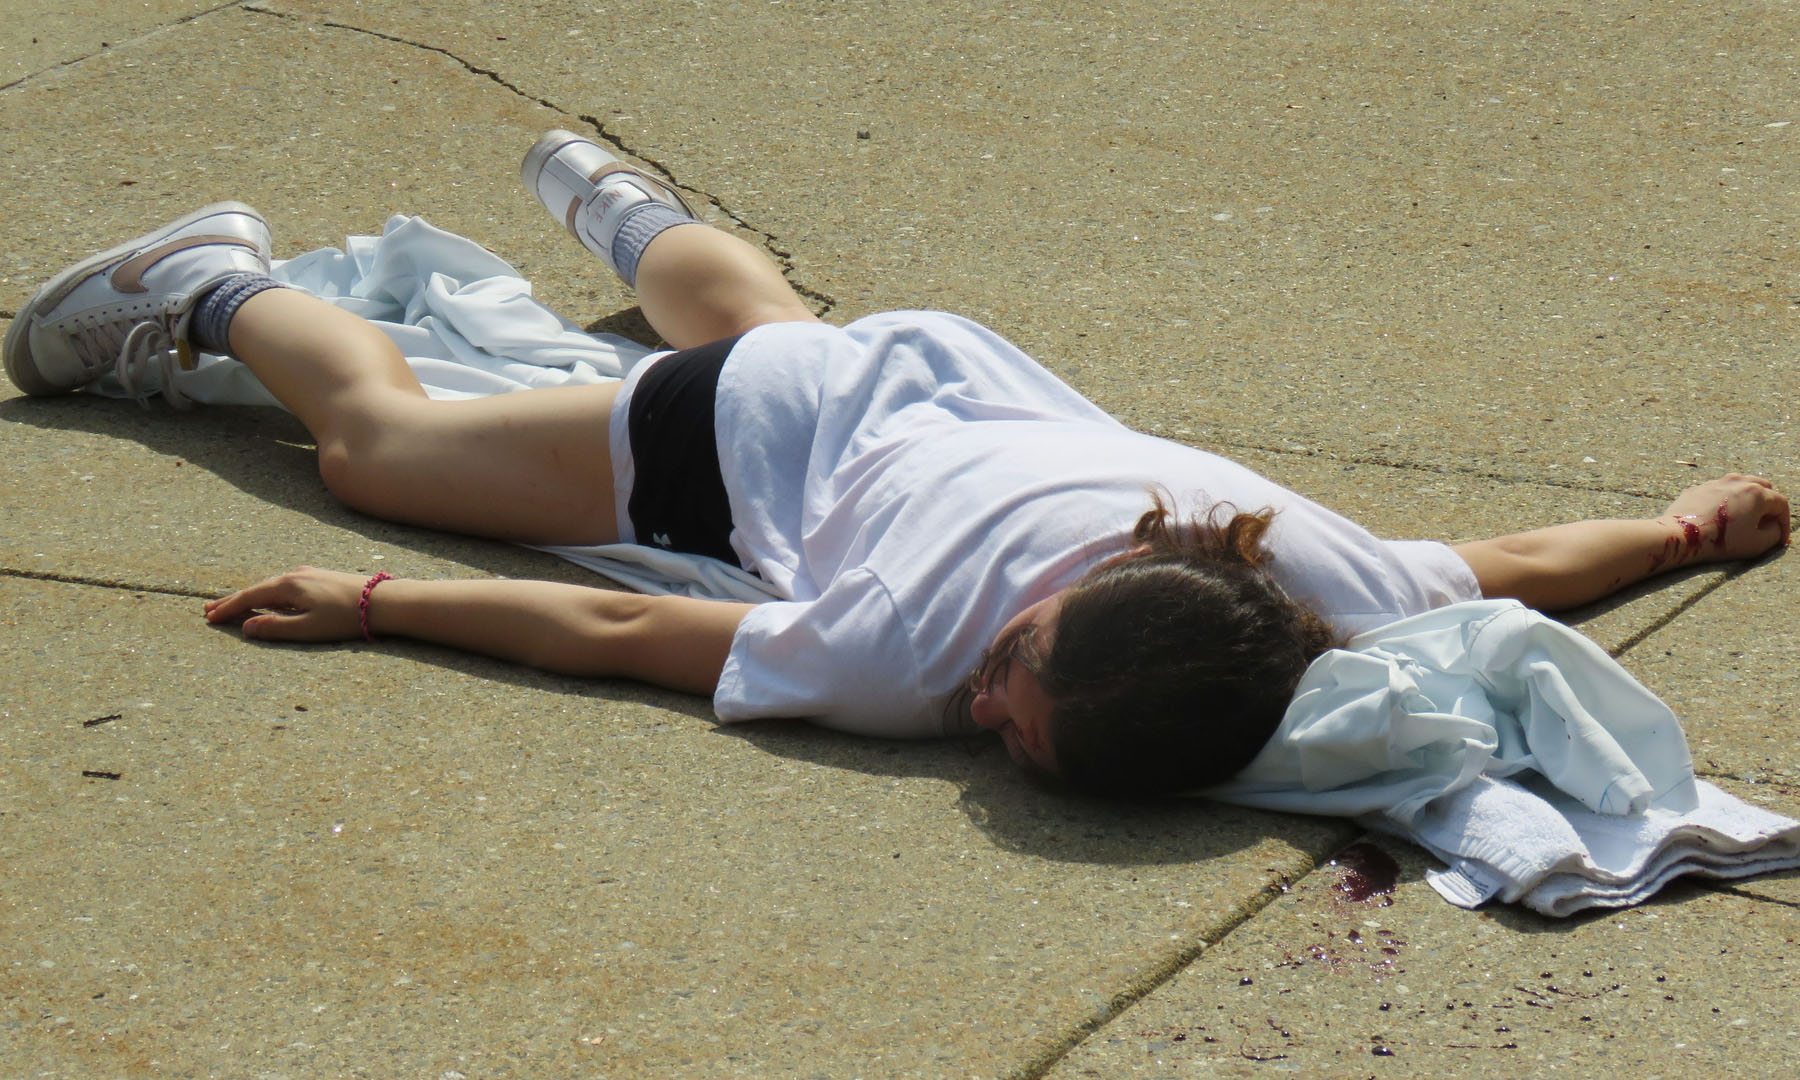 Pre-Prom mock fatal accident at MHS